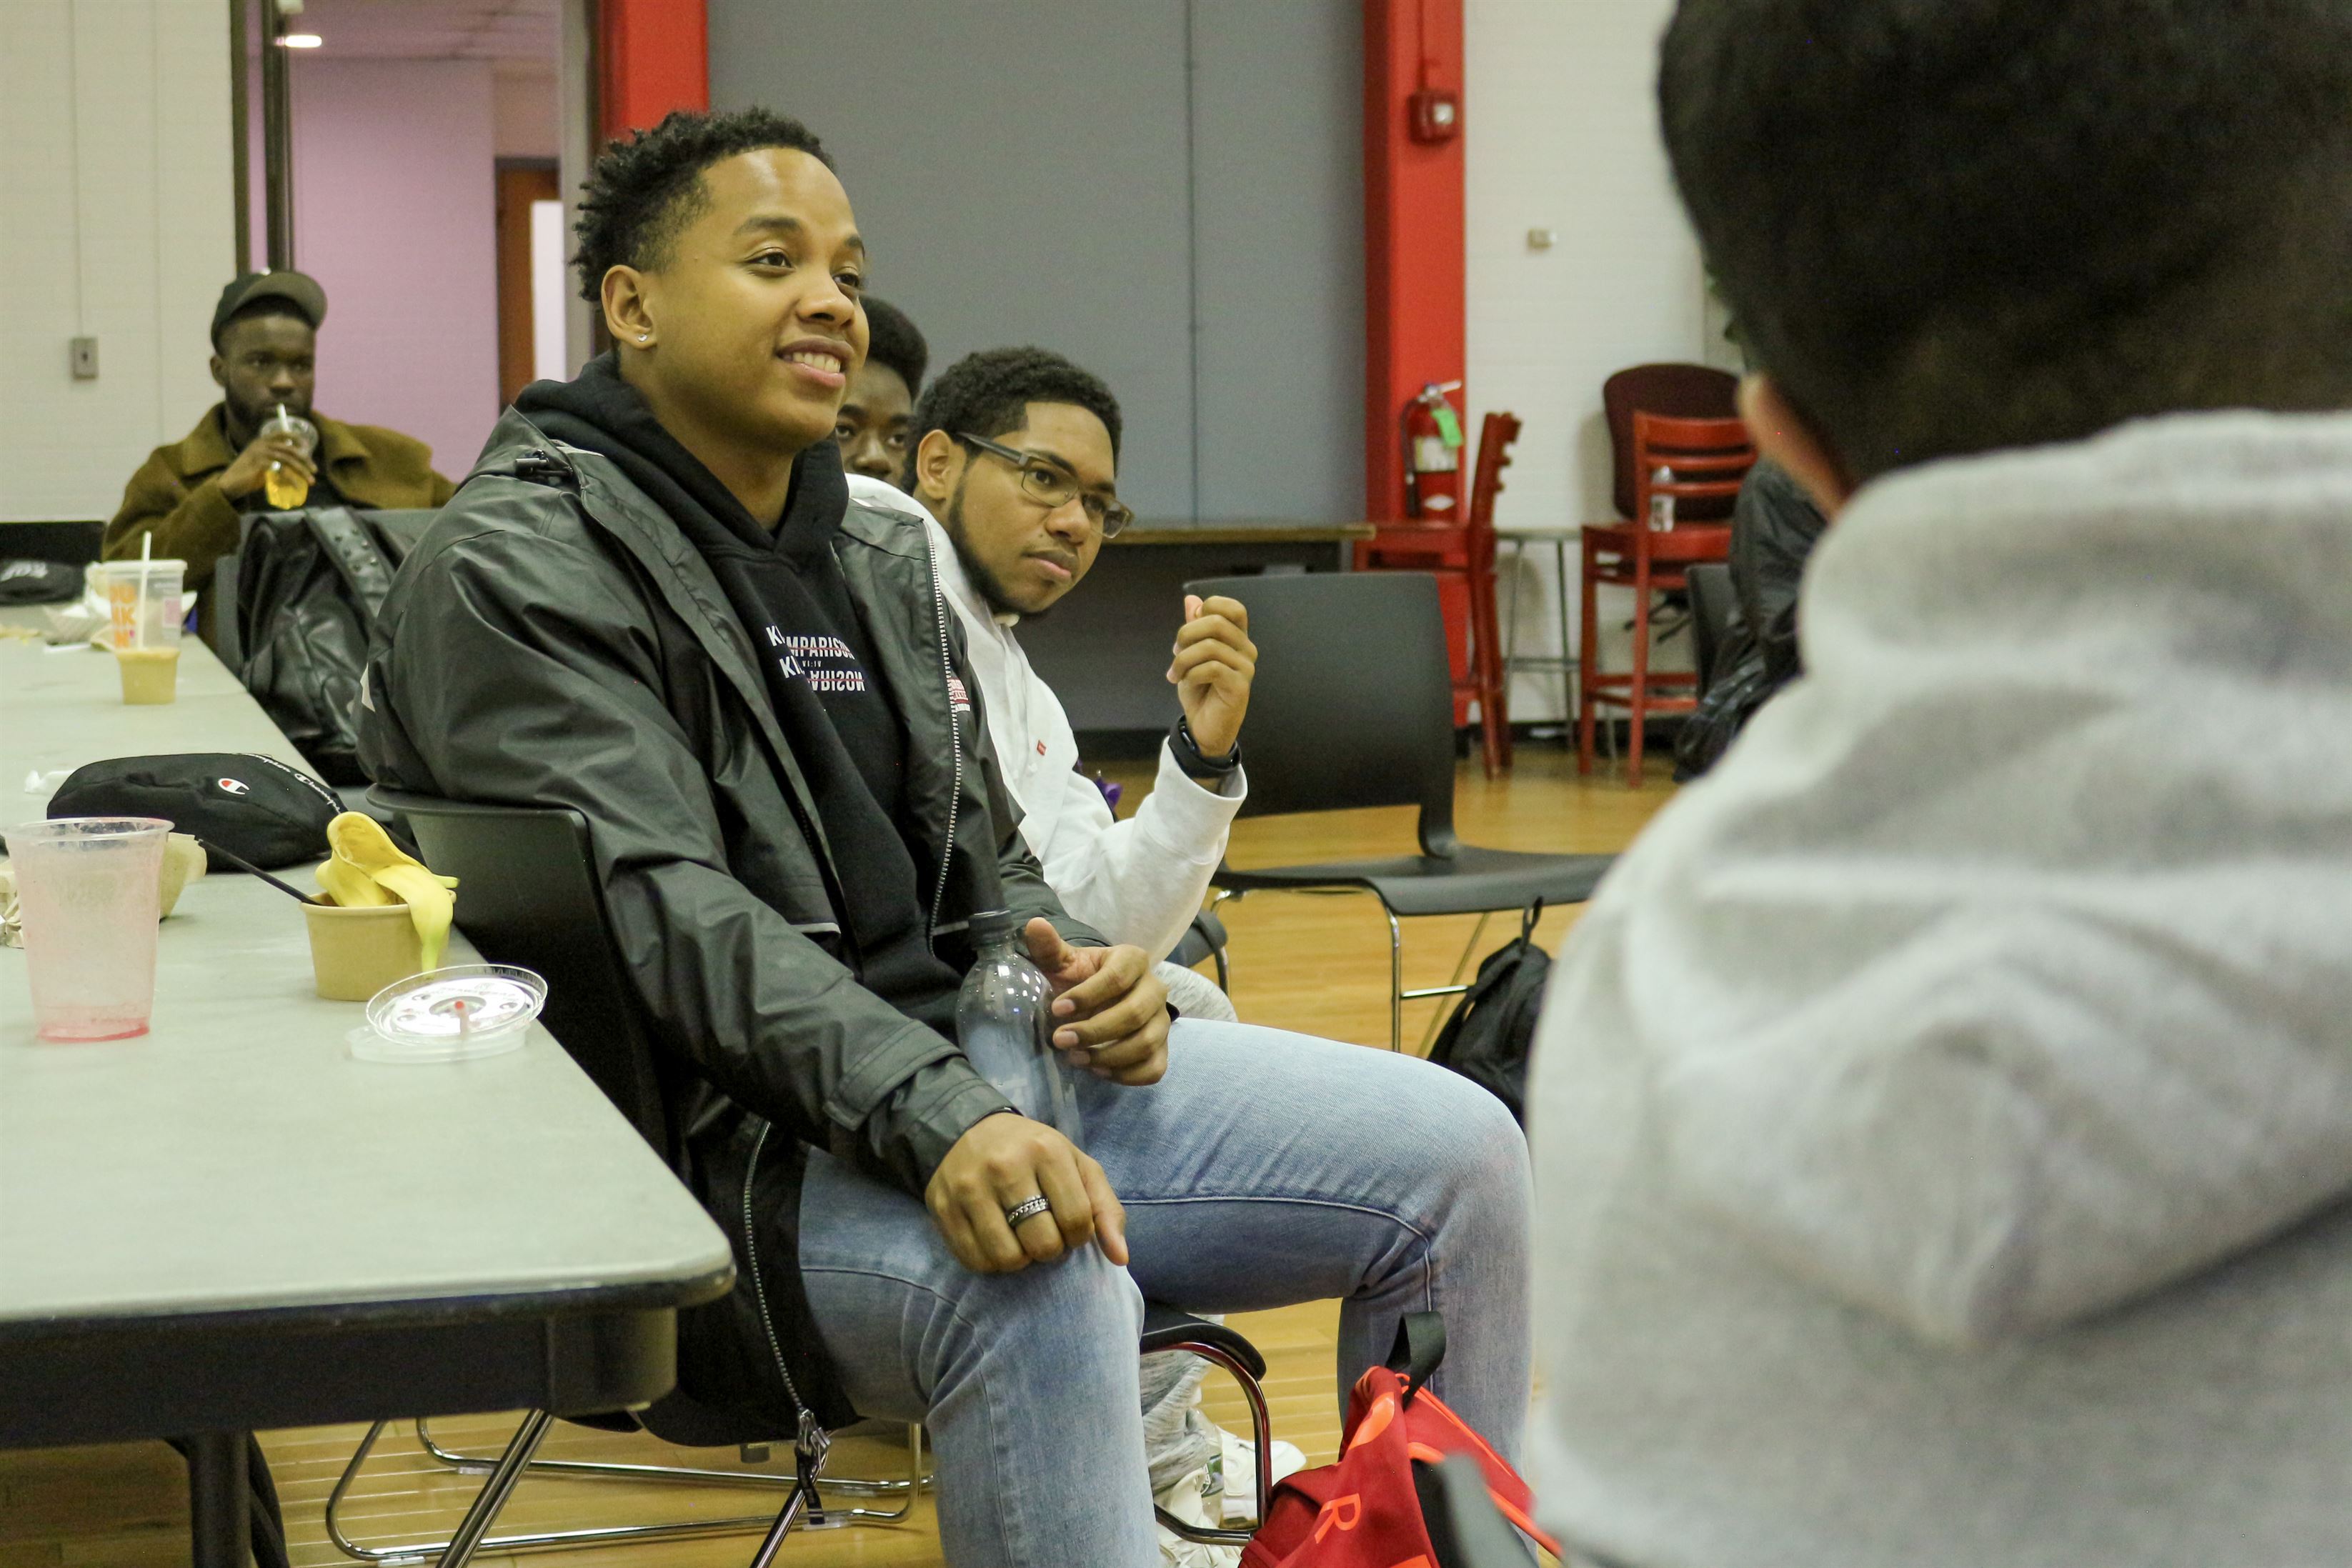 Vaughn Smith, Jr., a senior sports communication major, speaks to the other students at the EOF Barbershop.
Sal DiMaggio | The Montclarion